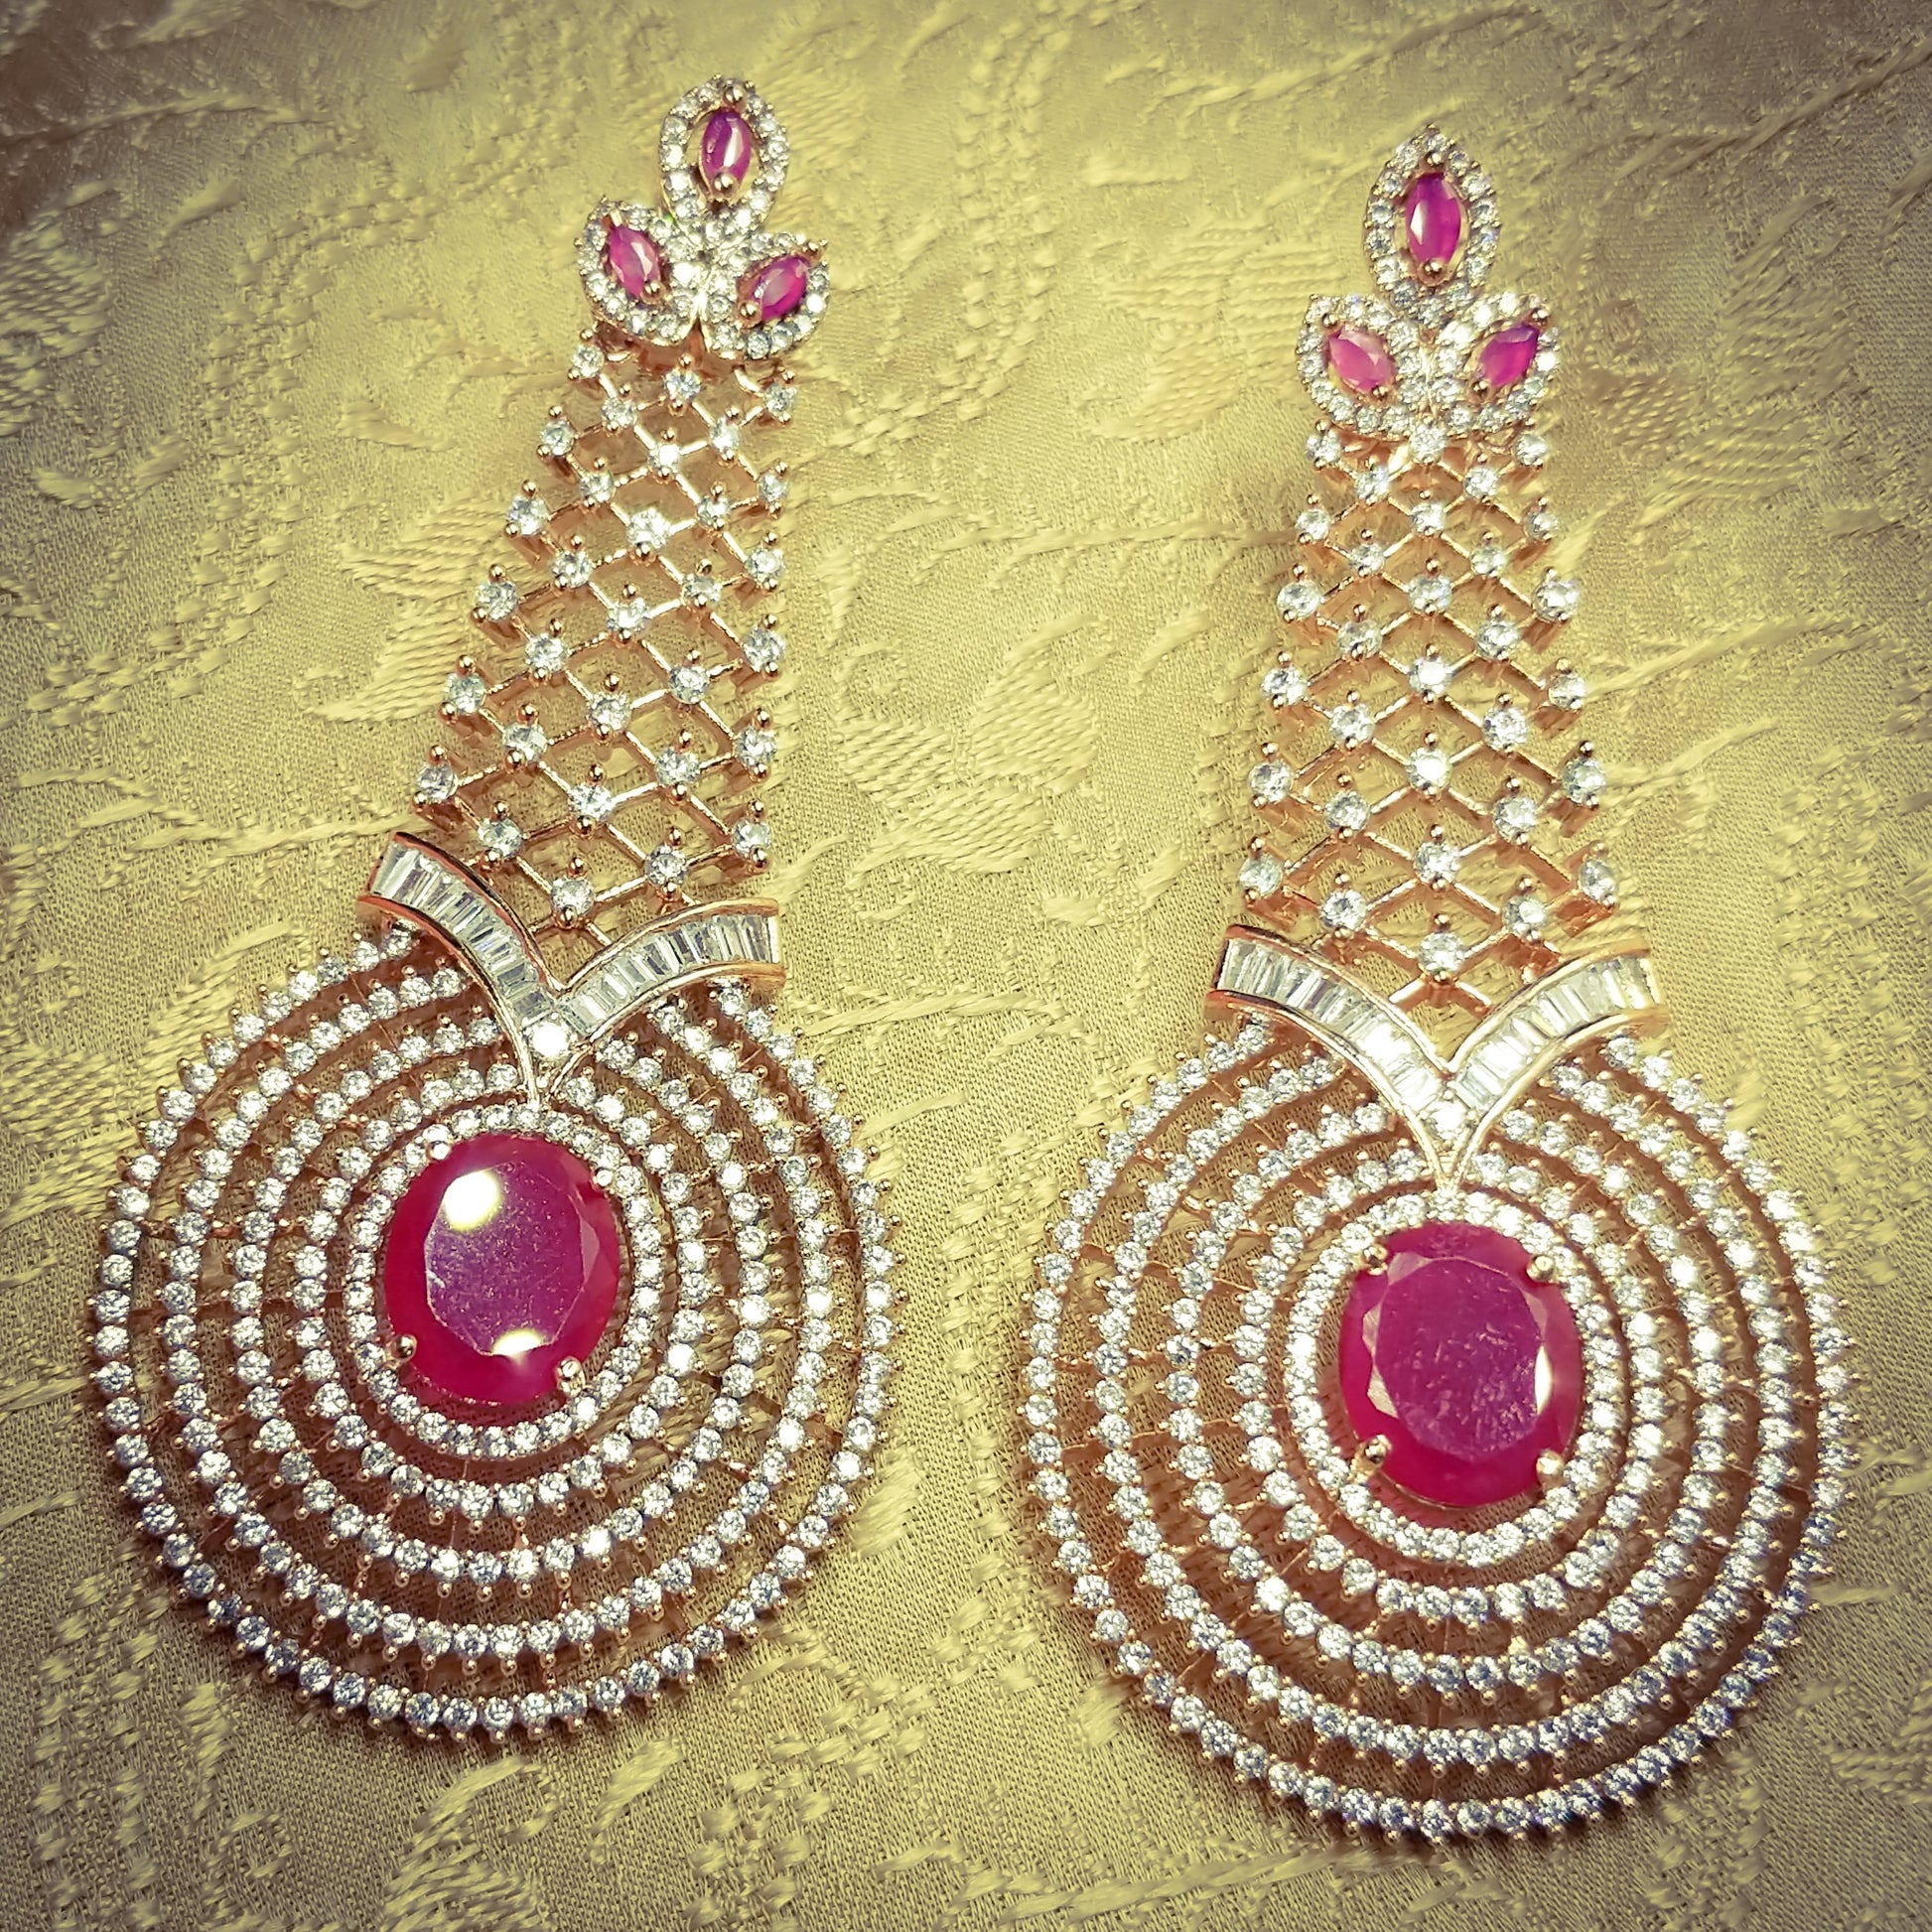 HANDCRAFTED LUXURY FASHION JEWELLERY BY JAUHRI EARRINGS-VALERIE